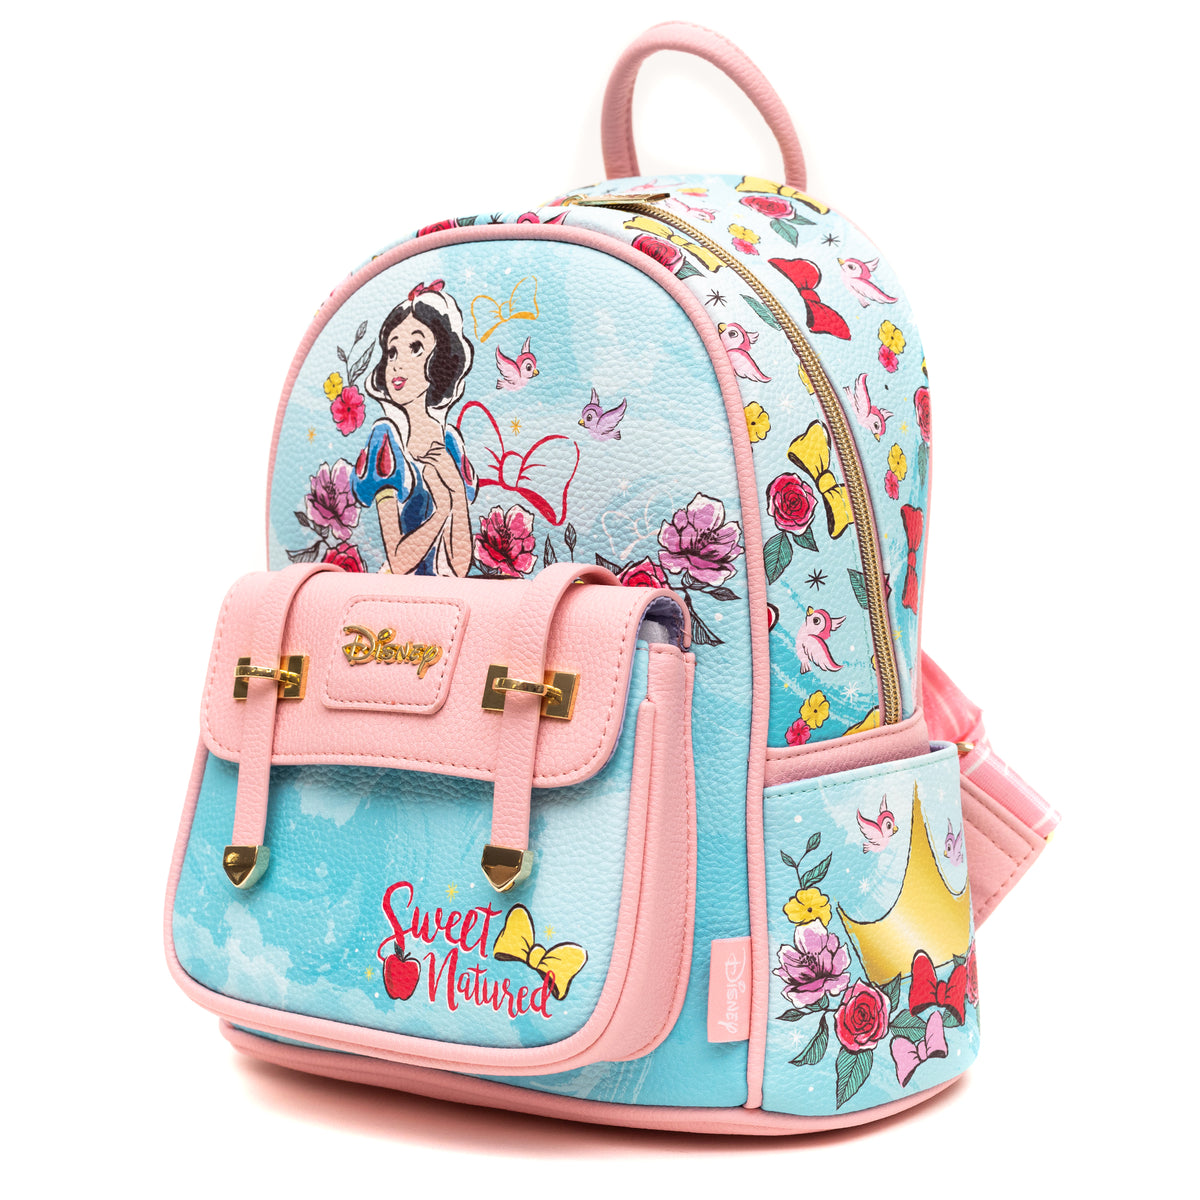 Disney Snow White and the Seven Dwarfs Mini Backpack - Limited Edition